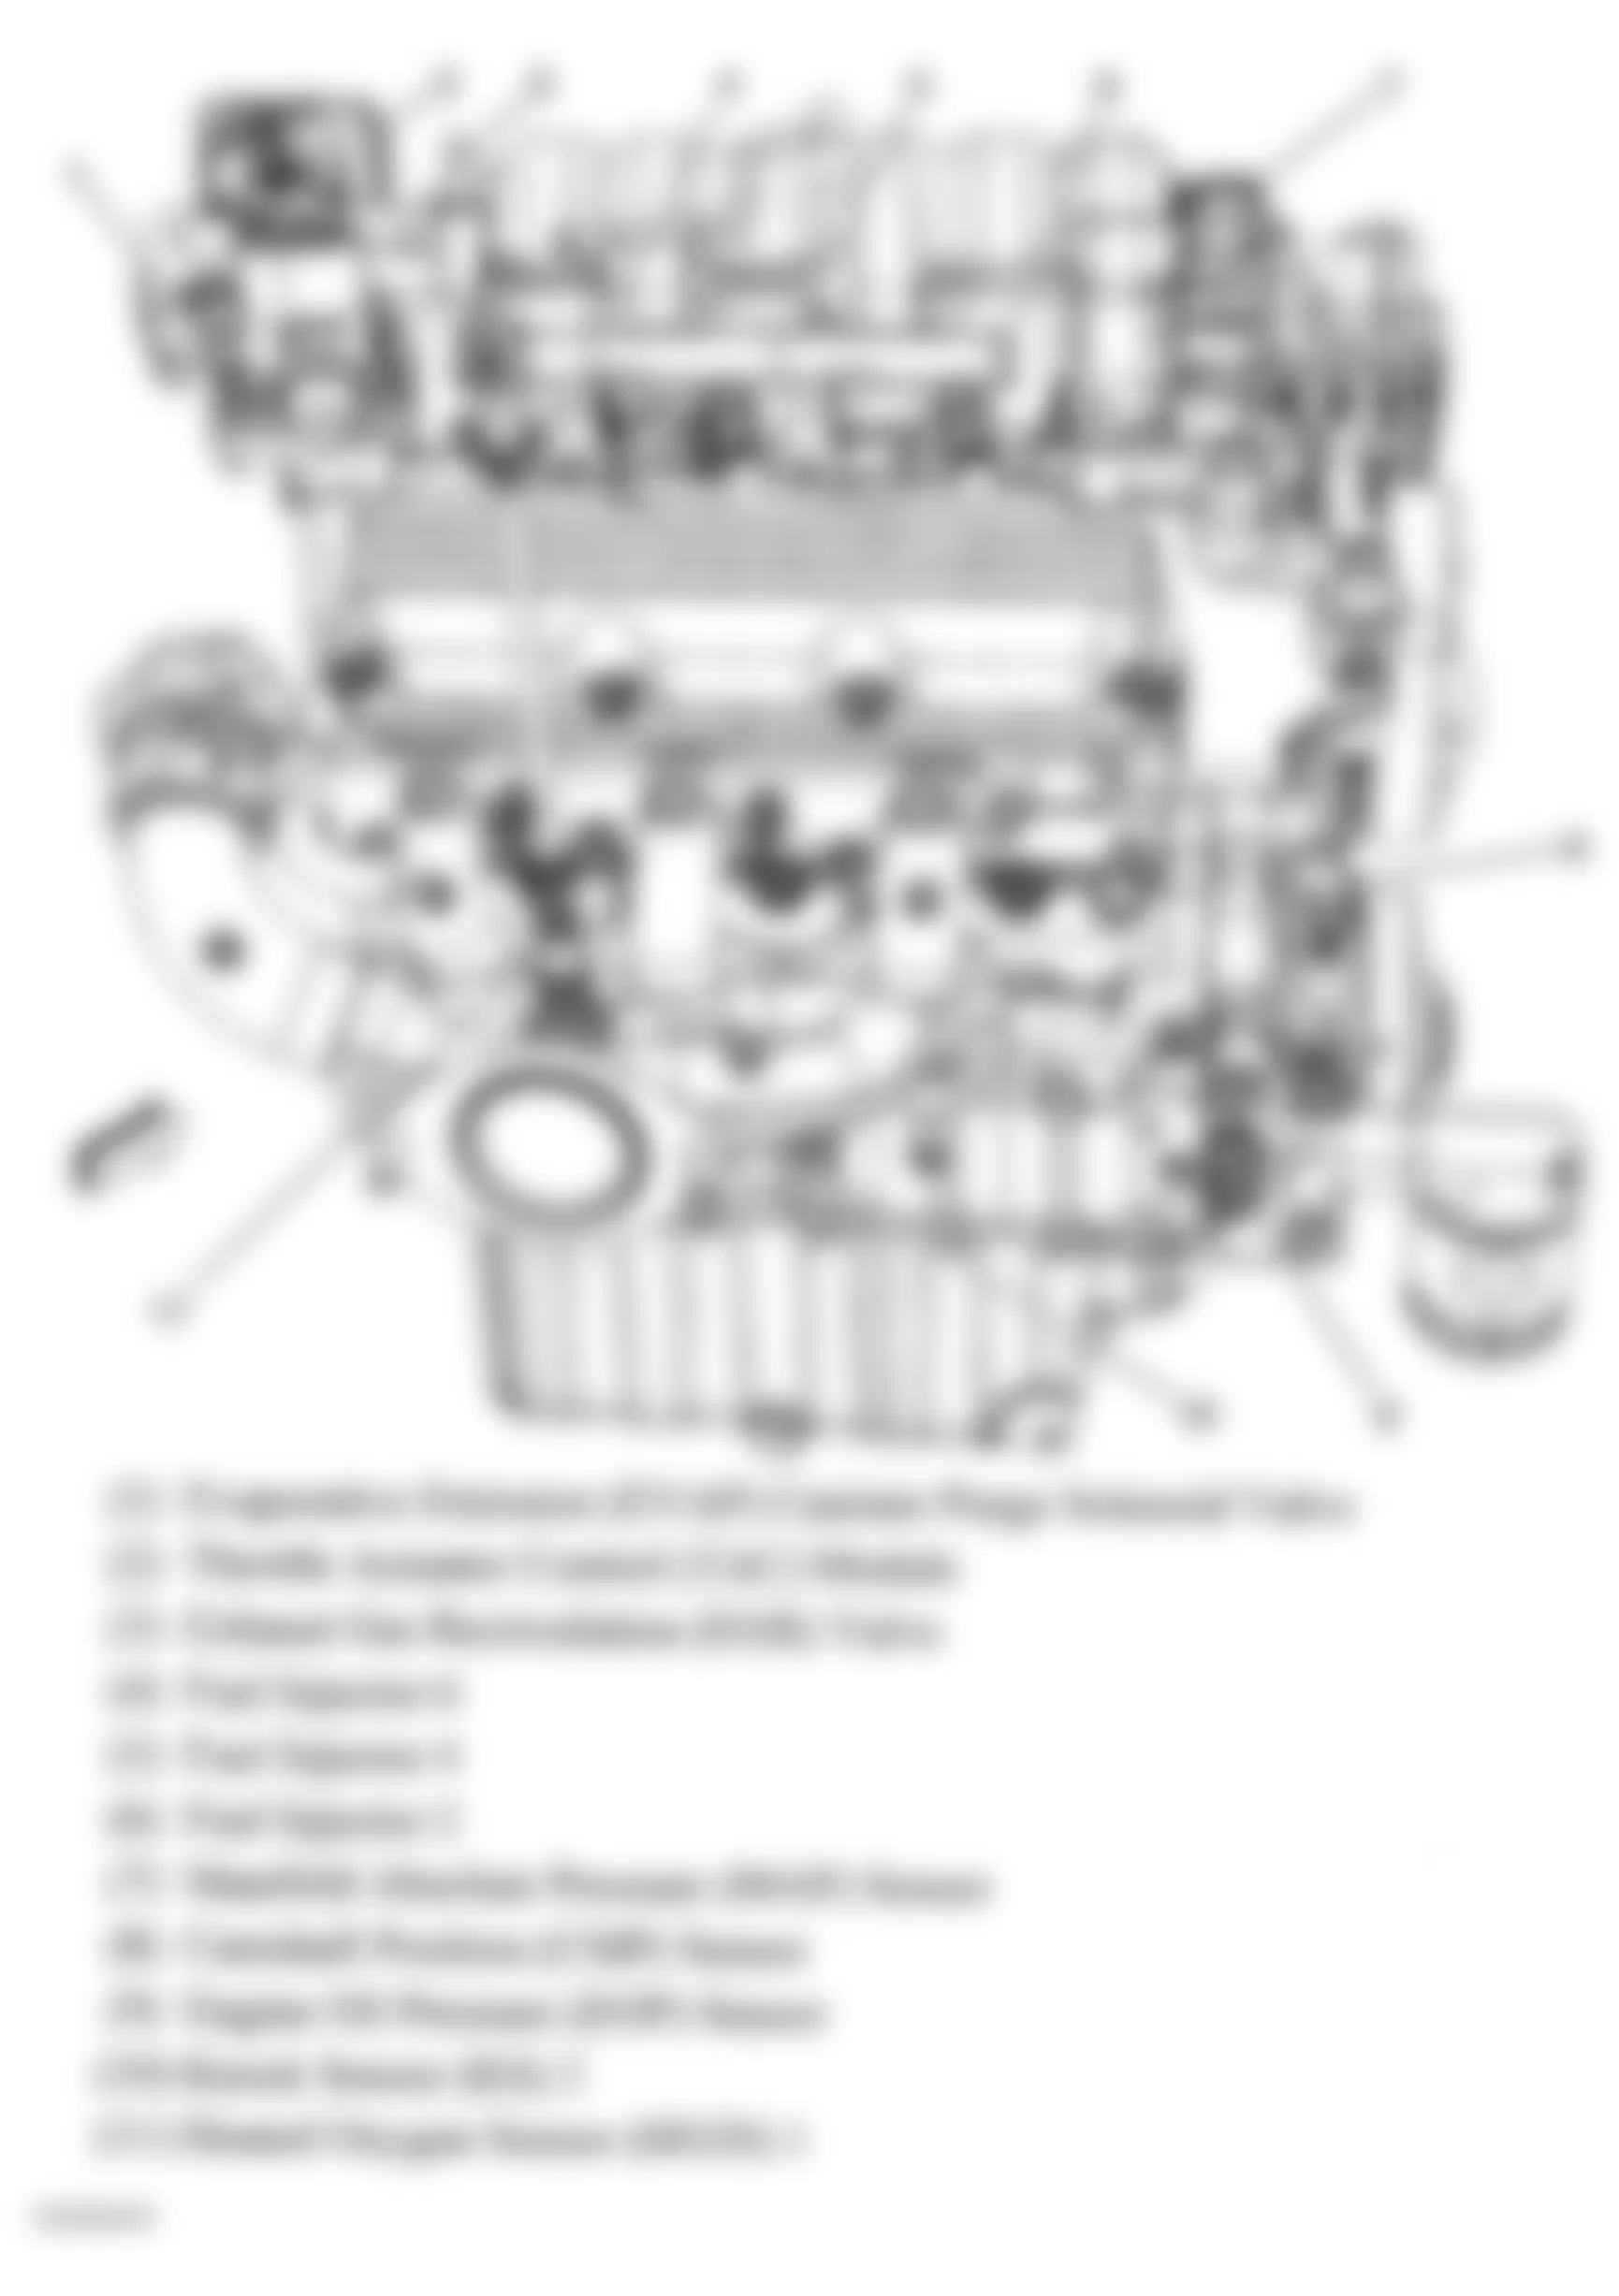 Buick Allure CXS 2008 - Component Locations -  Right Side Of Engine (3.8L)